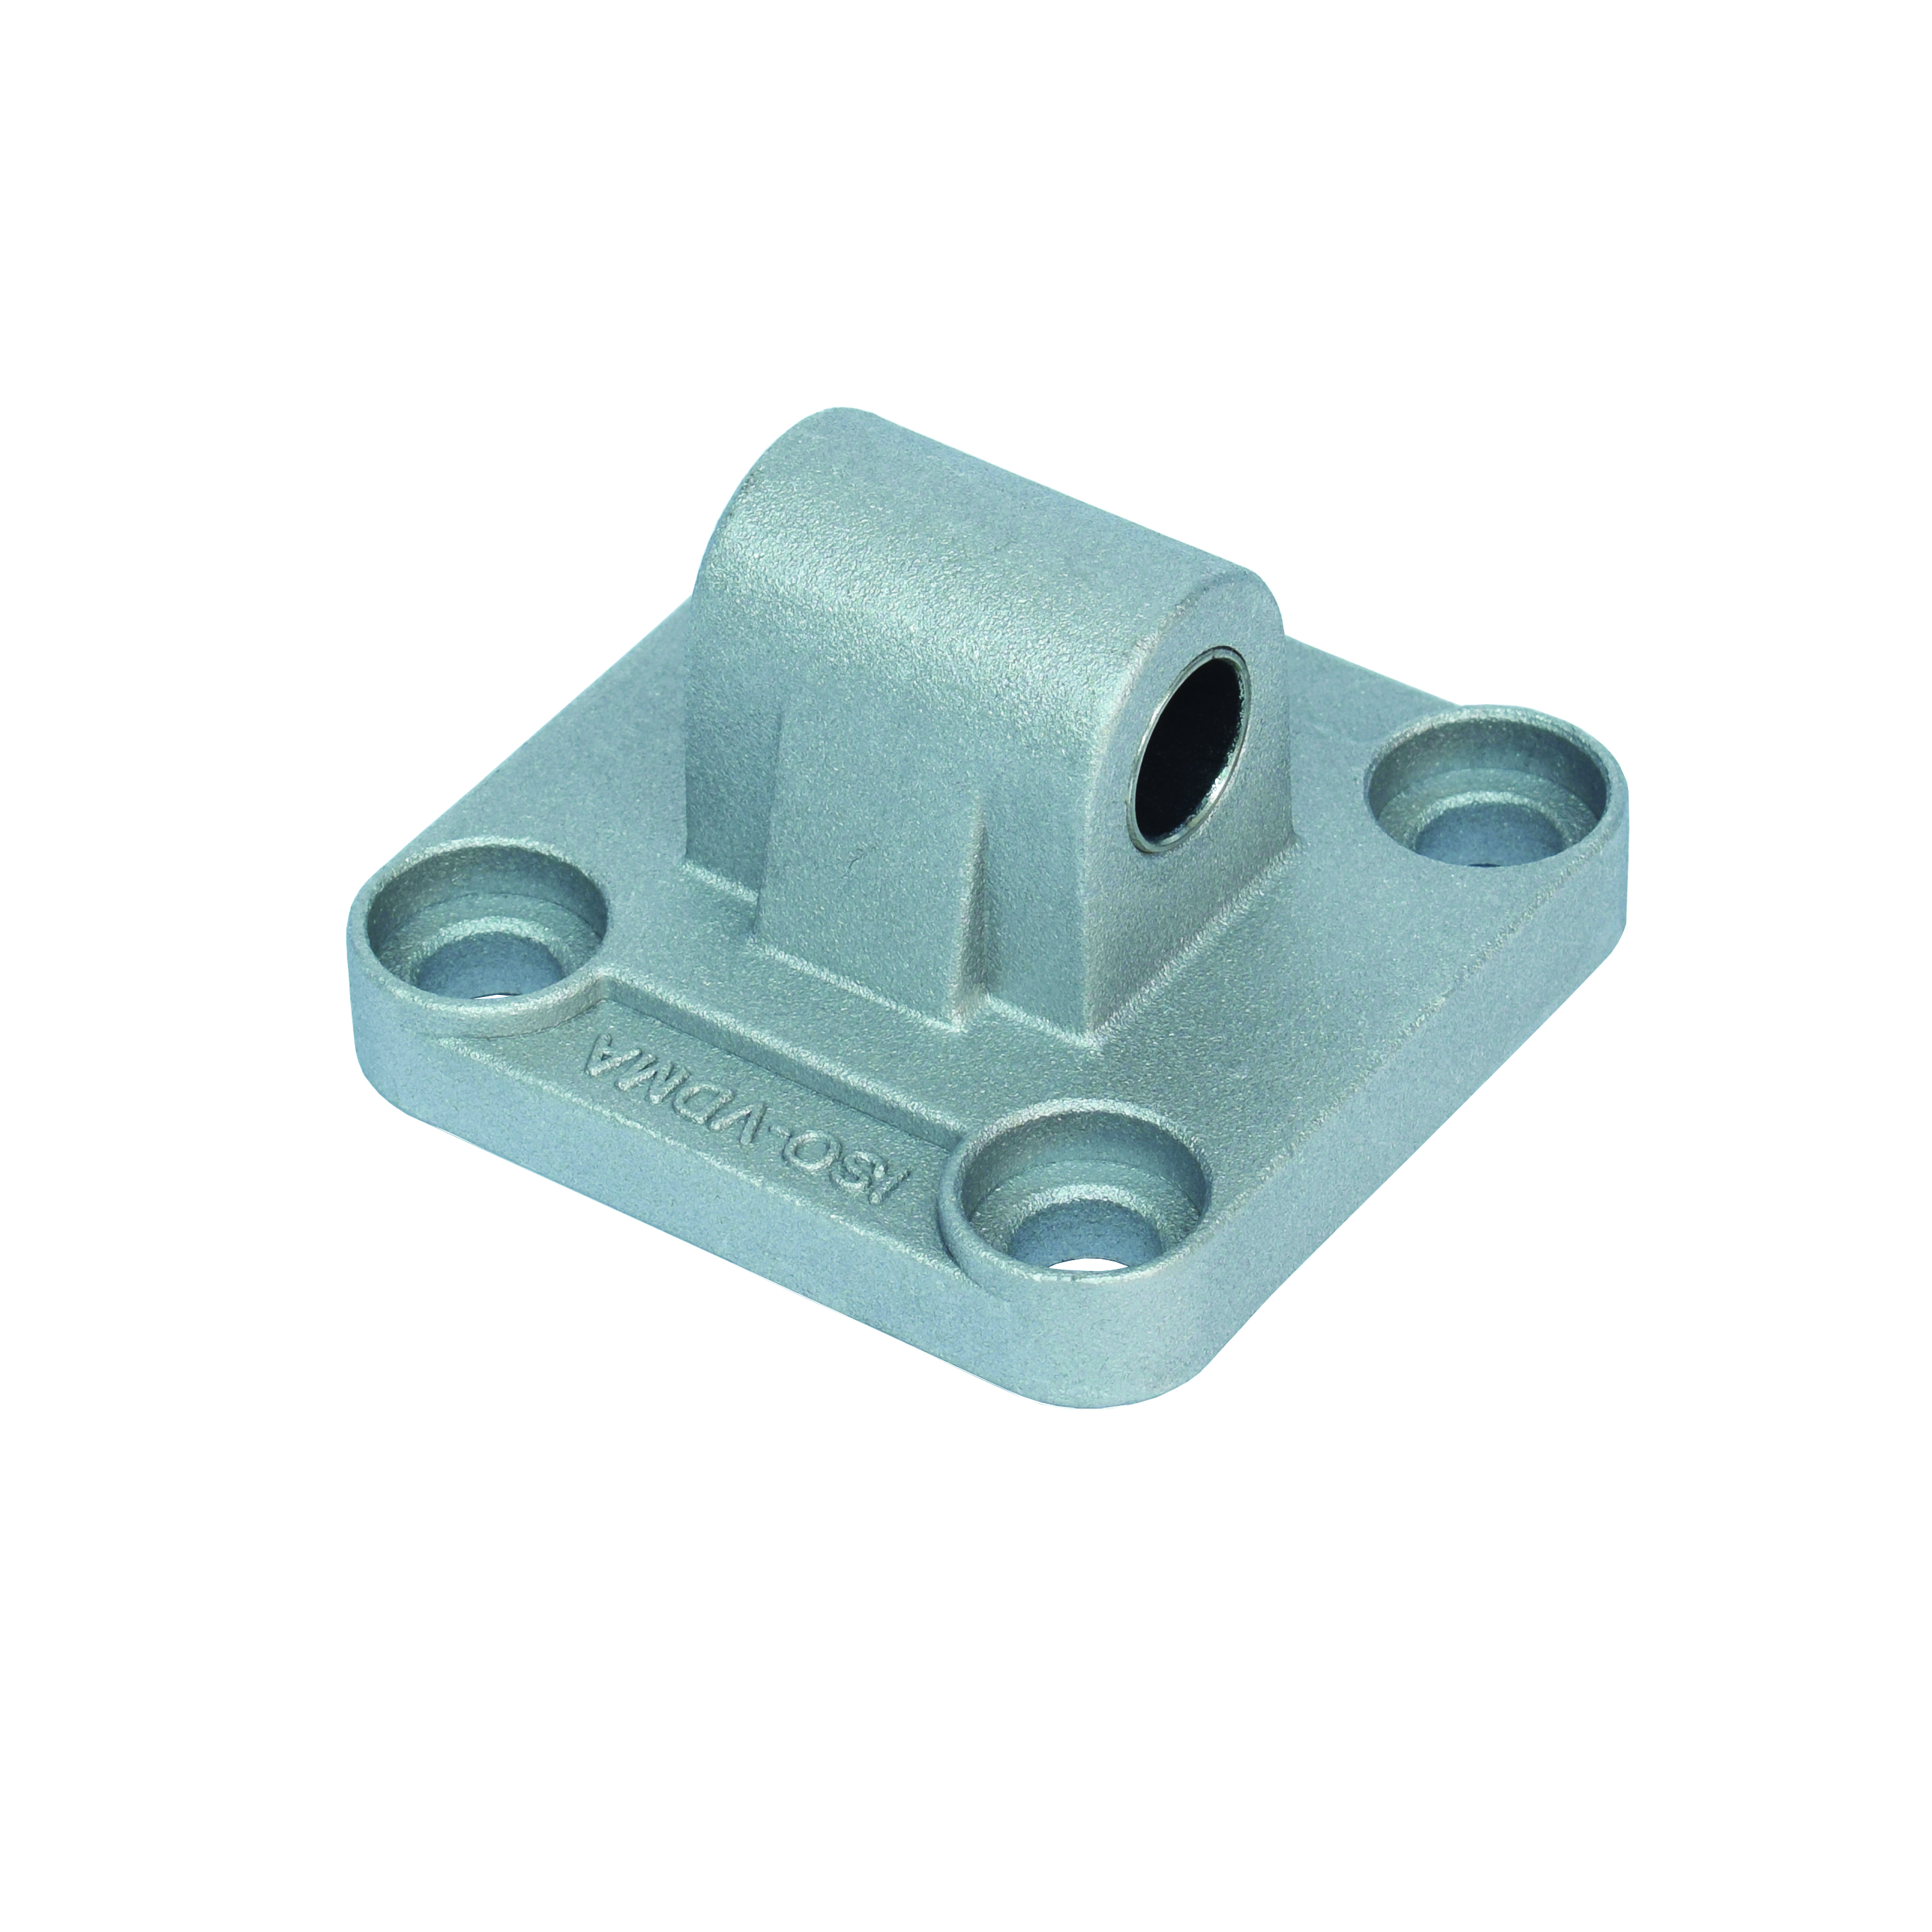 Male joints for pneumatic cylinders ISO 15552 Pneumatic components